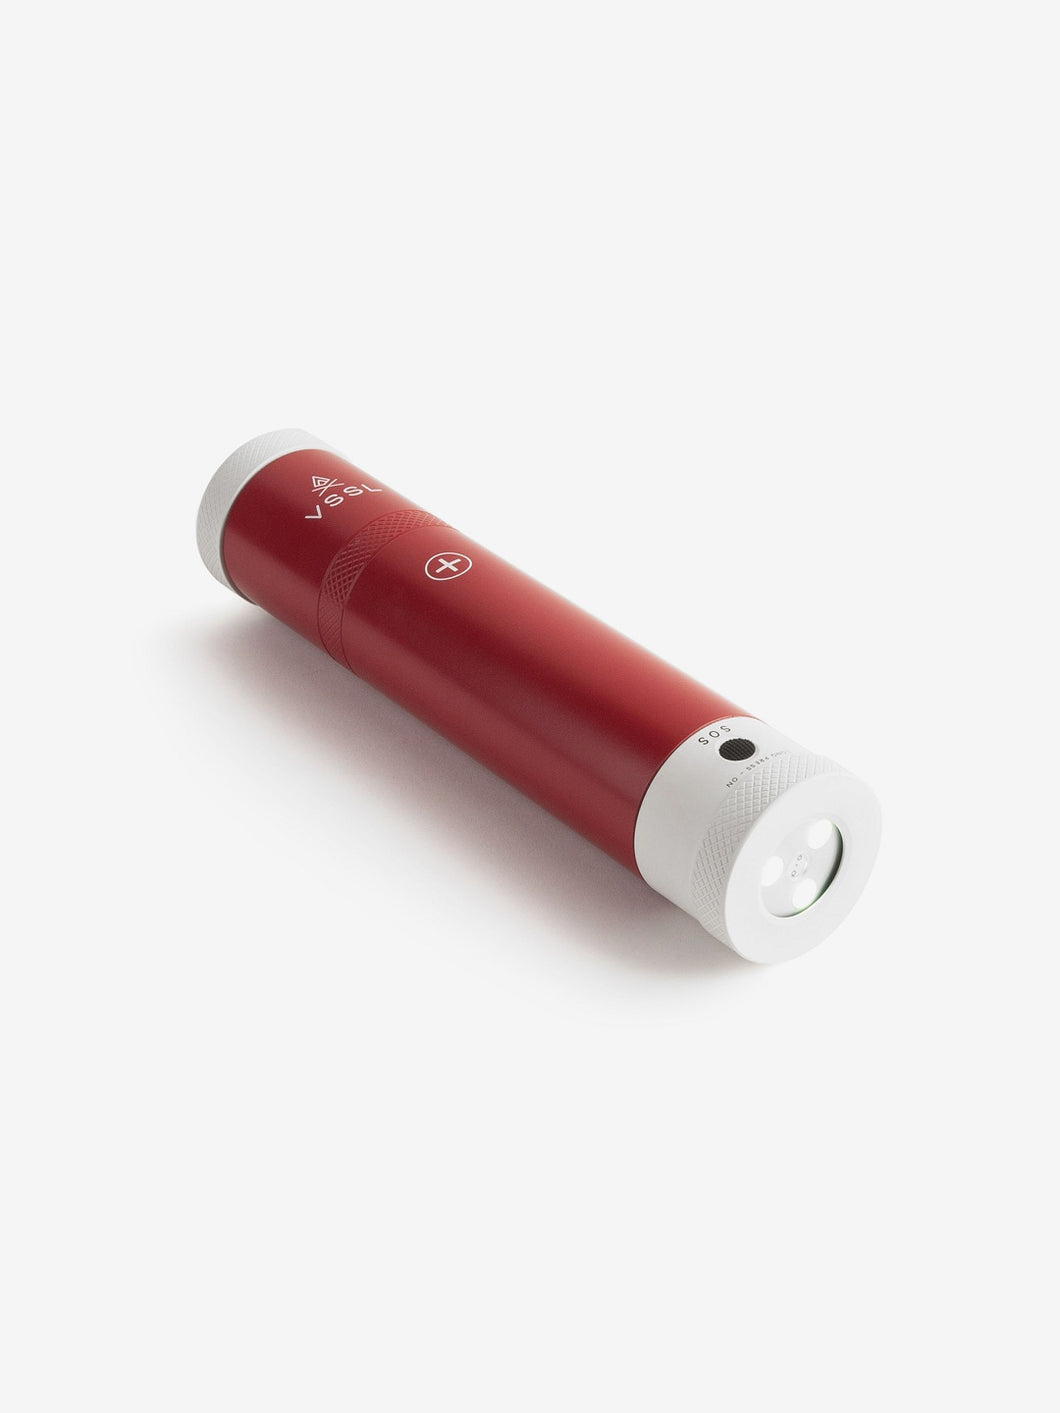 Pictured is a red cylinder, the top end has a white end cap and the letters VSSL written in white below it on the body of the cylinder, with the other white end cap being a flashlight. This is the packed compact VSSL First Aid. Perfect for your overland canada roof top tent camping first aid kit needs! Available for sale by SMRT Tent in Edmonton, Canada.